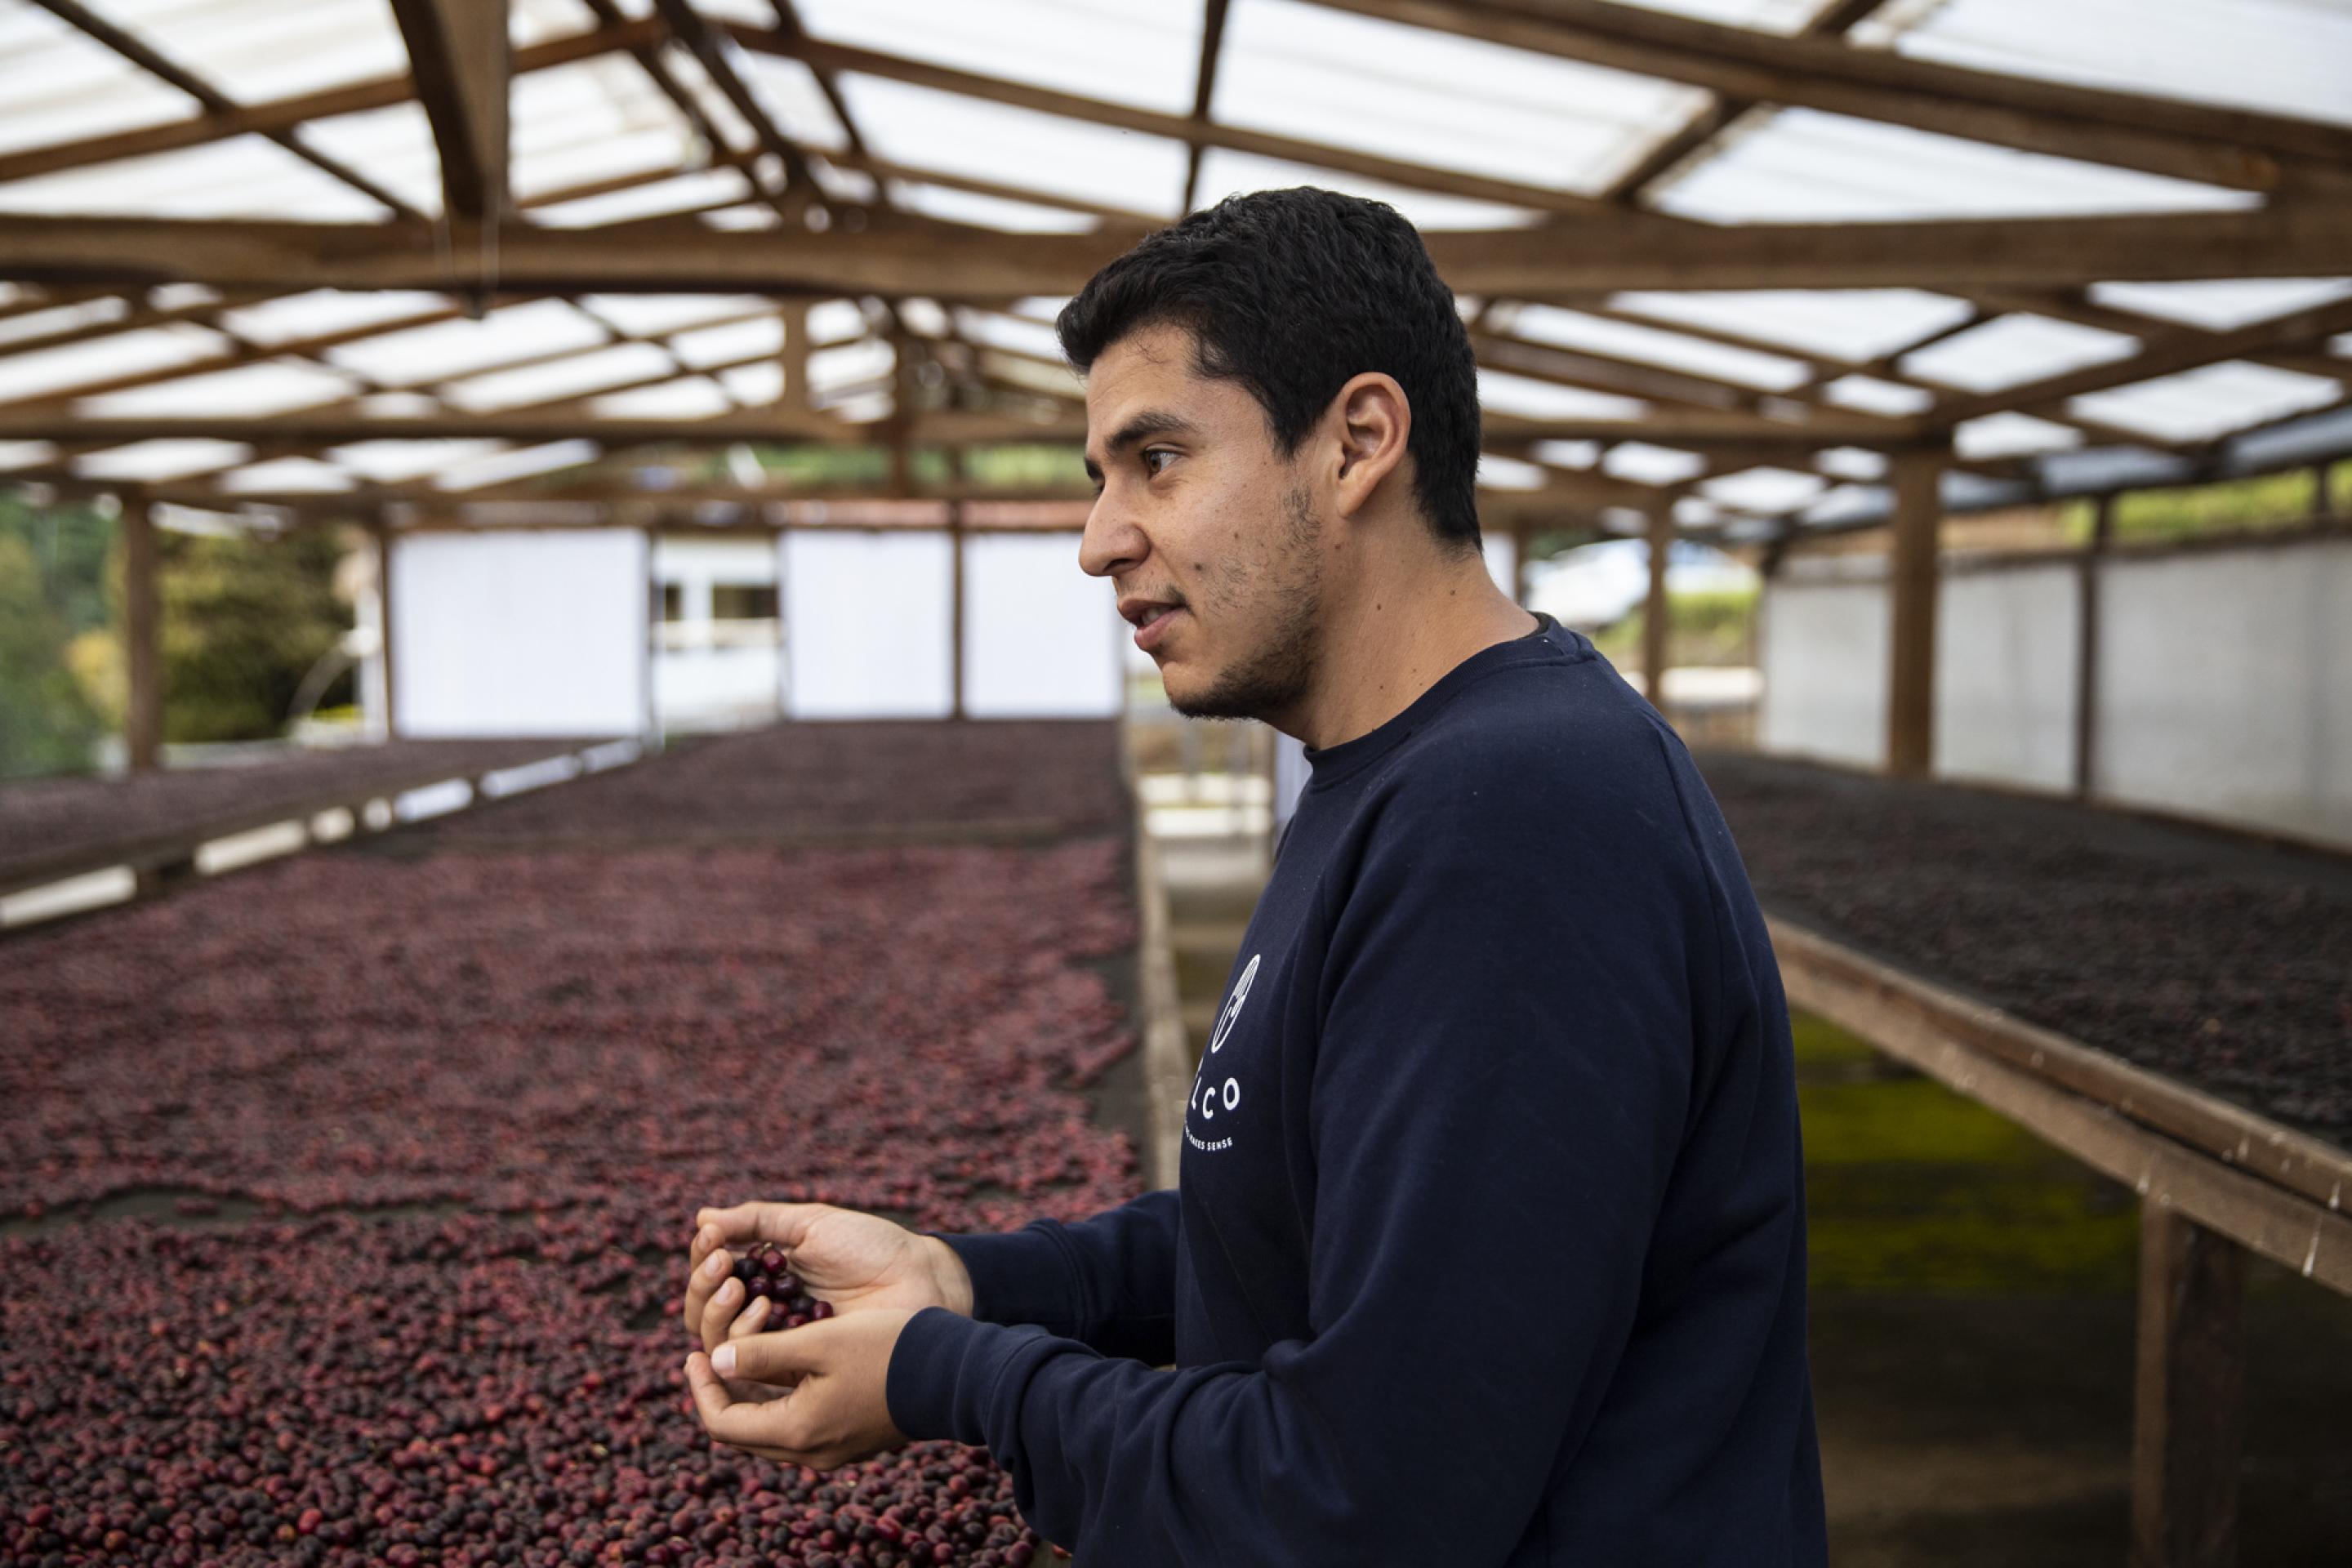 Ángel Barrera is an agroindustrial engineer, MSc in Food Technology, fourth generation of a coffee producing family in El Salvador, and current Head of Sourcing at BELCO, an independent French importer of sustainable coffees. Ángel is passionate about reading & writing, professional on the first & amateur on the second.